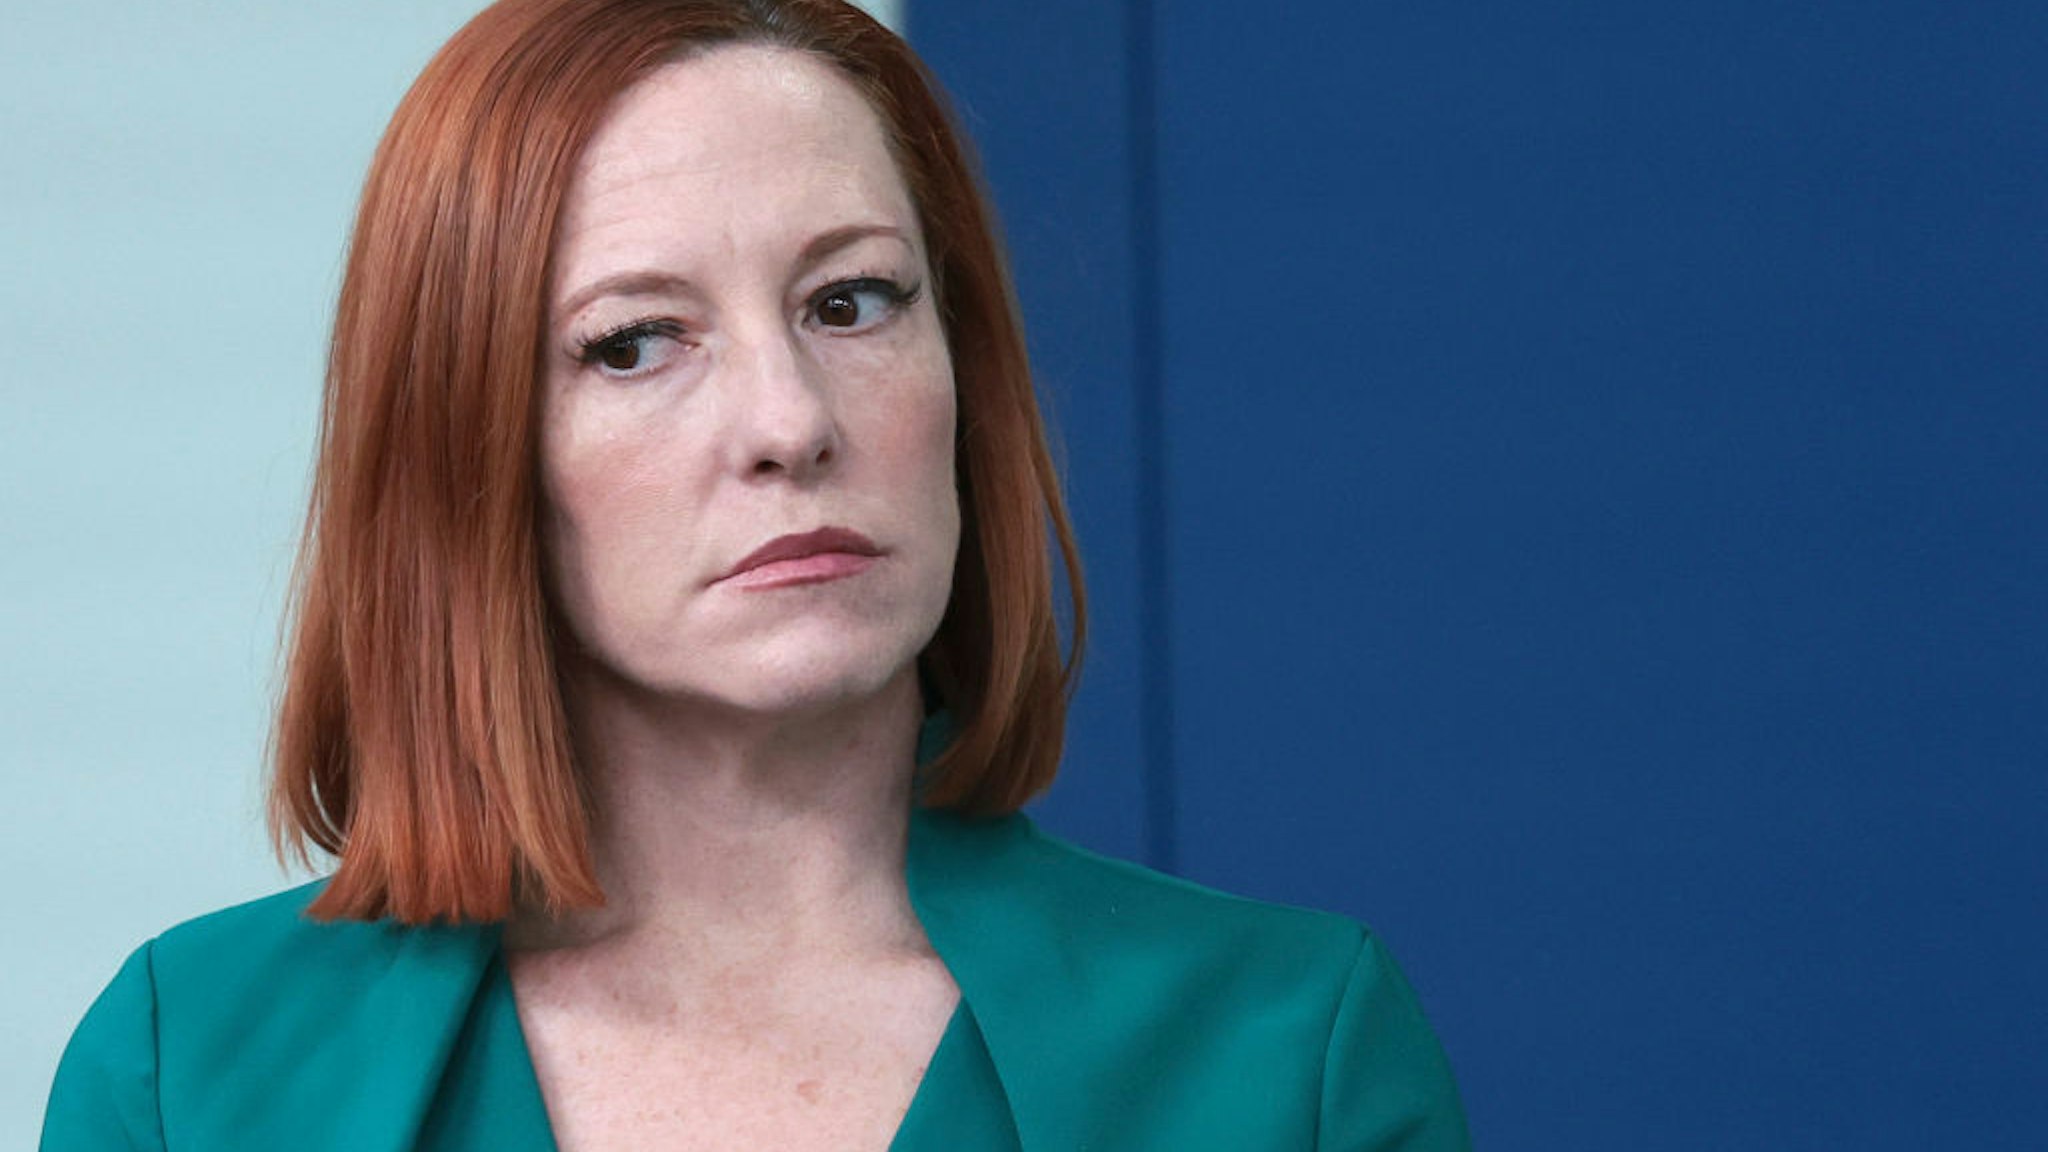 WASHINGTON, DC - MARCH 04: White House press secretary Jen Psaki answers questions during the daily press briefing March 4, 2022 in Washington, DC. Psaki answered a range of questions related primarily to the Russian invasion of Ukraine. (Photo by Win McNamee/Getty Images)